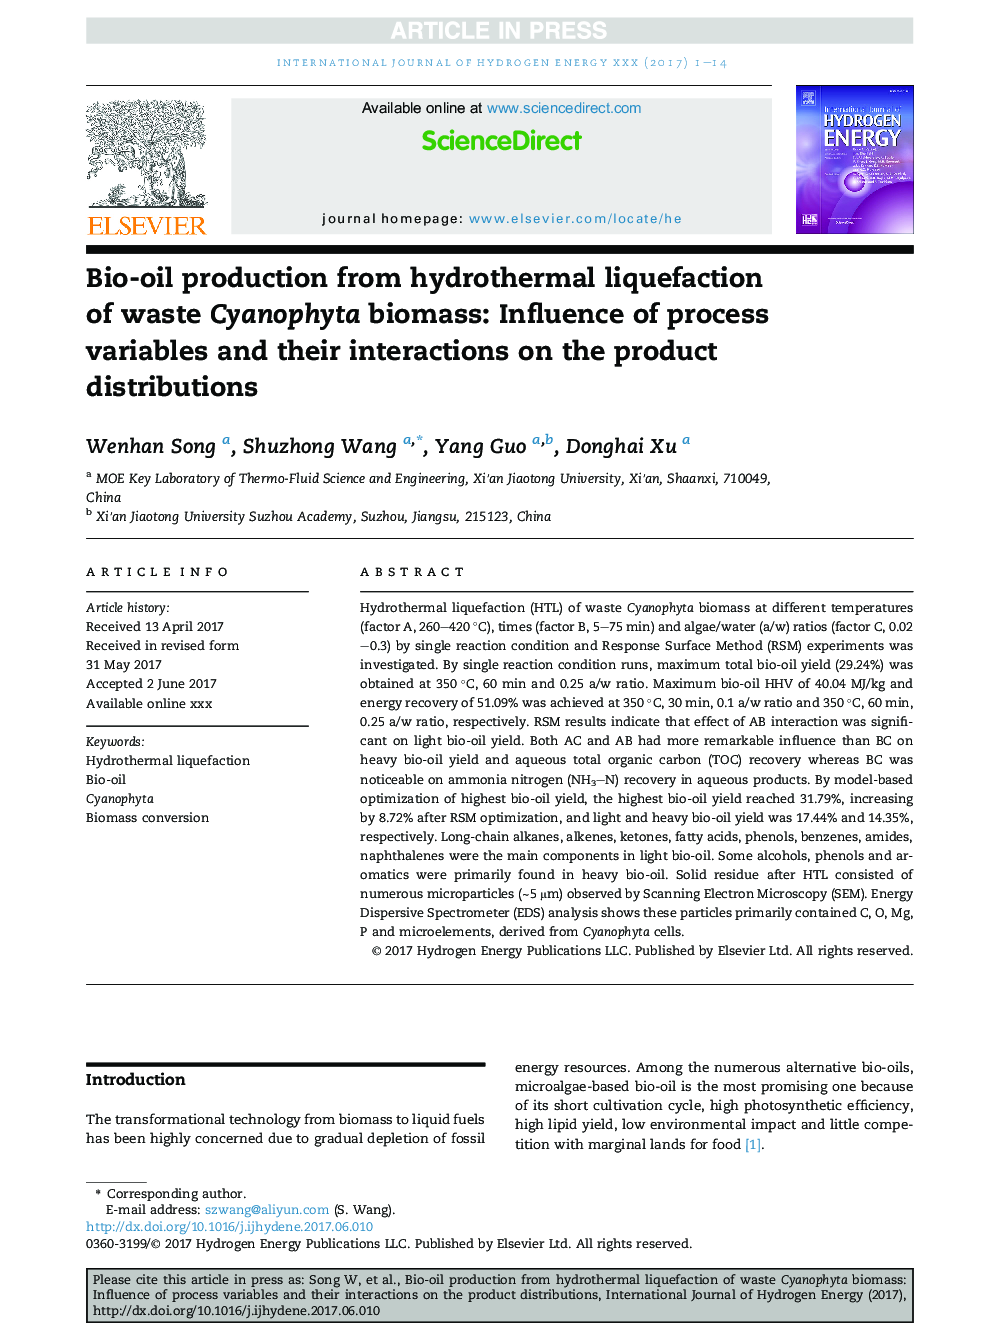 Bio-oil production from hydrothermal liquefaction of waste Cyanophyta biomass: Influence of process variables and their interactions on the product distributions